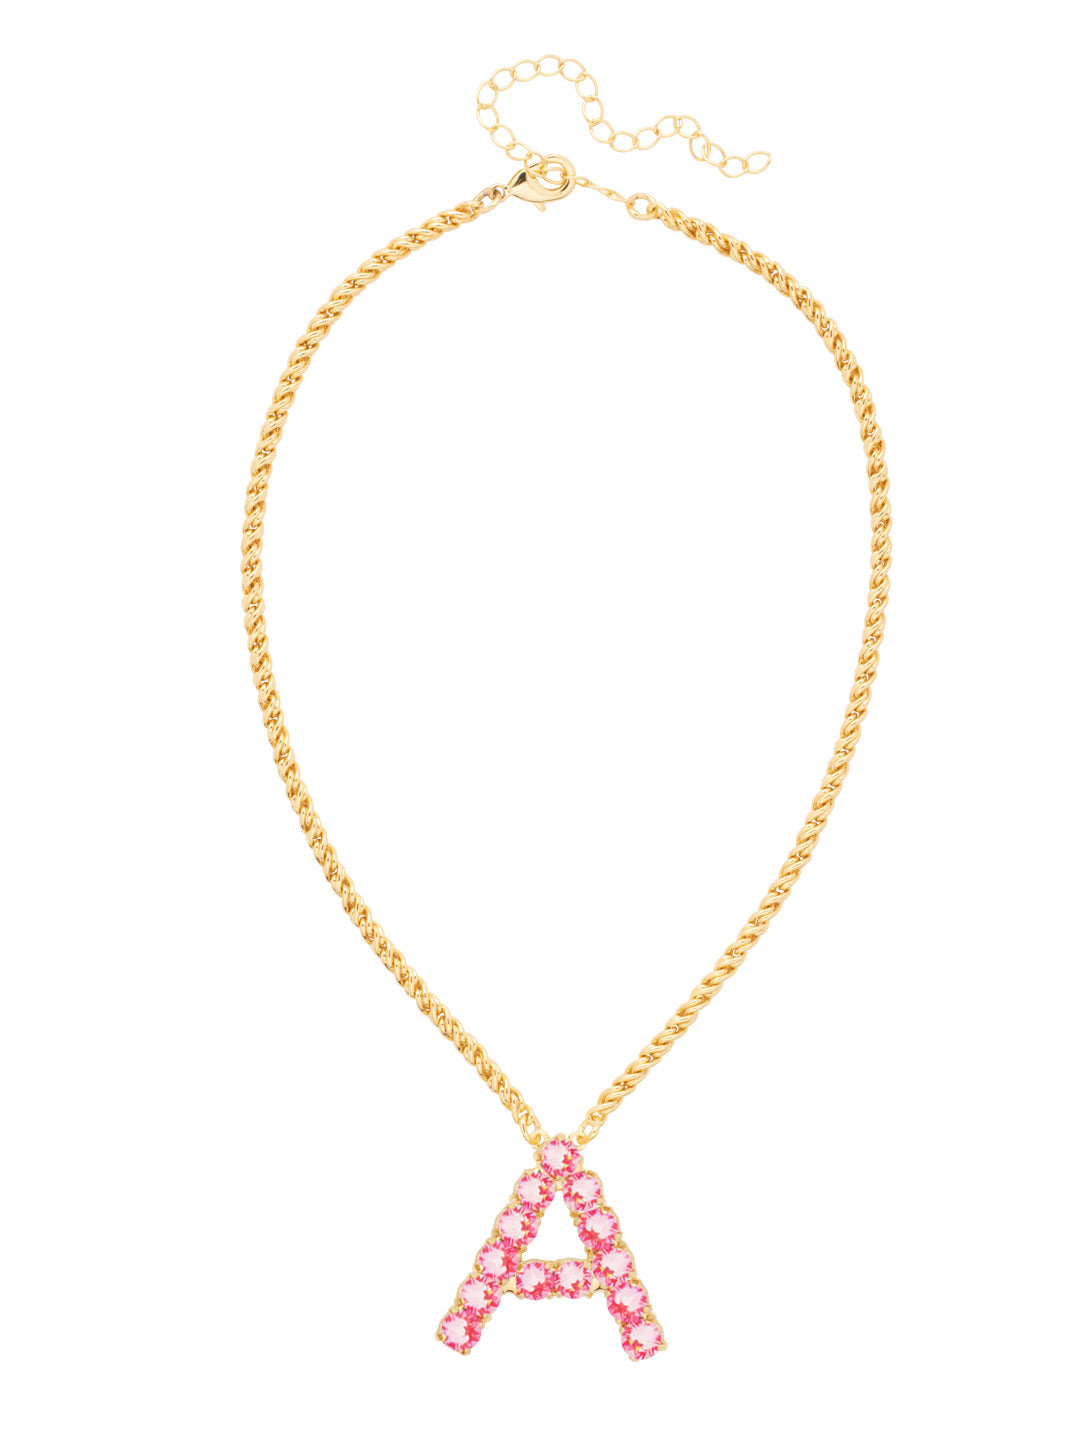 A Initial Rope Pendant Necklace - NFK20BGETP - <p>The Initial Rope Pendant Necklace features a crystal encrusted metal monogram pendant on an adjustable rope chain, secured with a lobster claw clasp. From Sorrelli's Electric Pink collection in our Bright Gold-tone finish.</p>